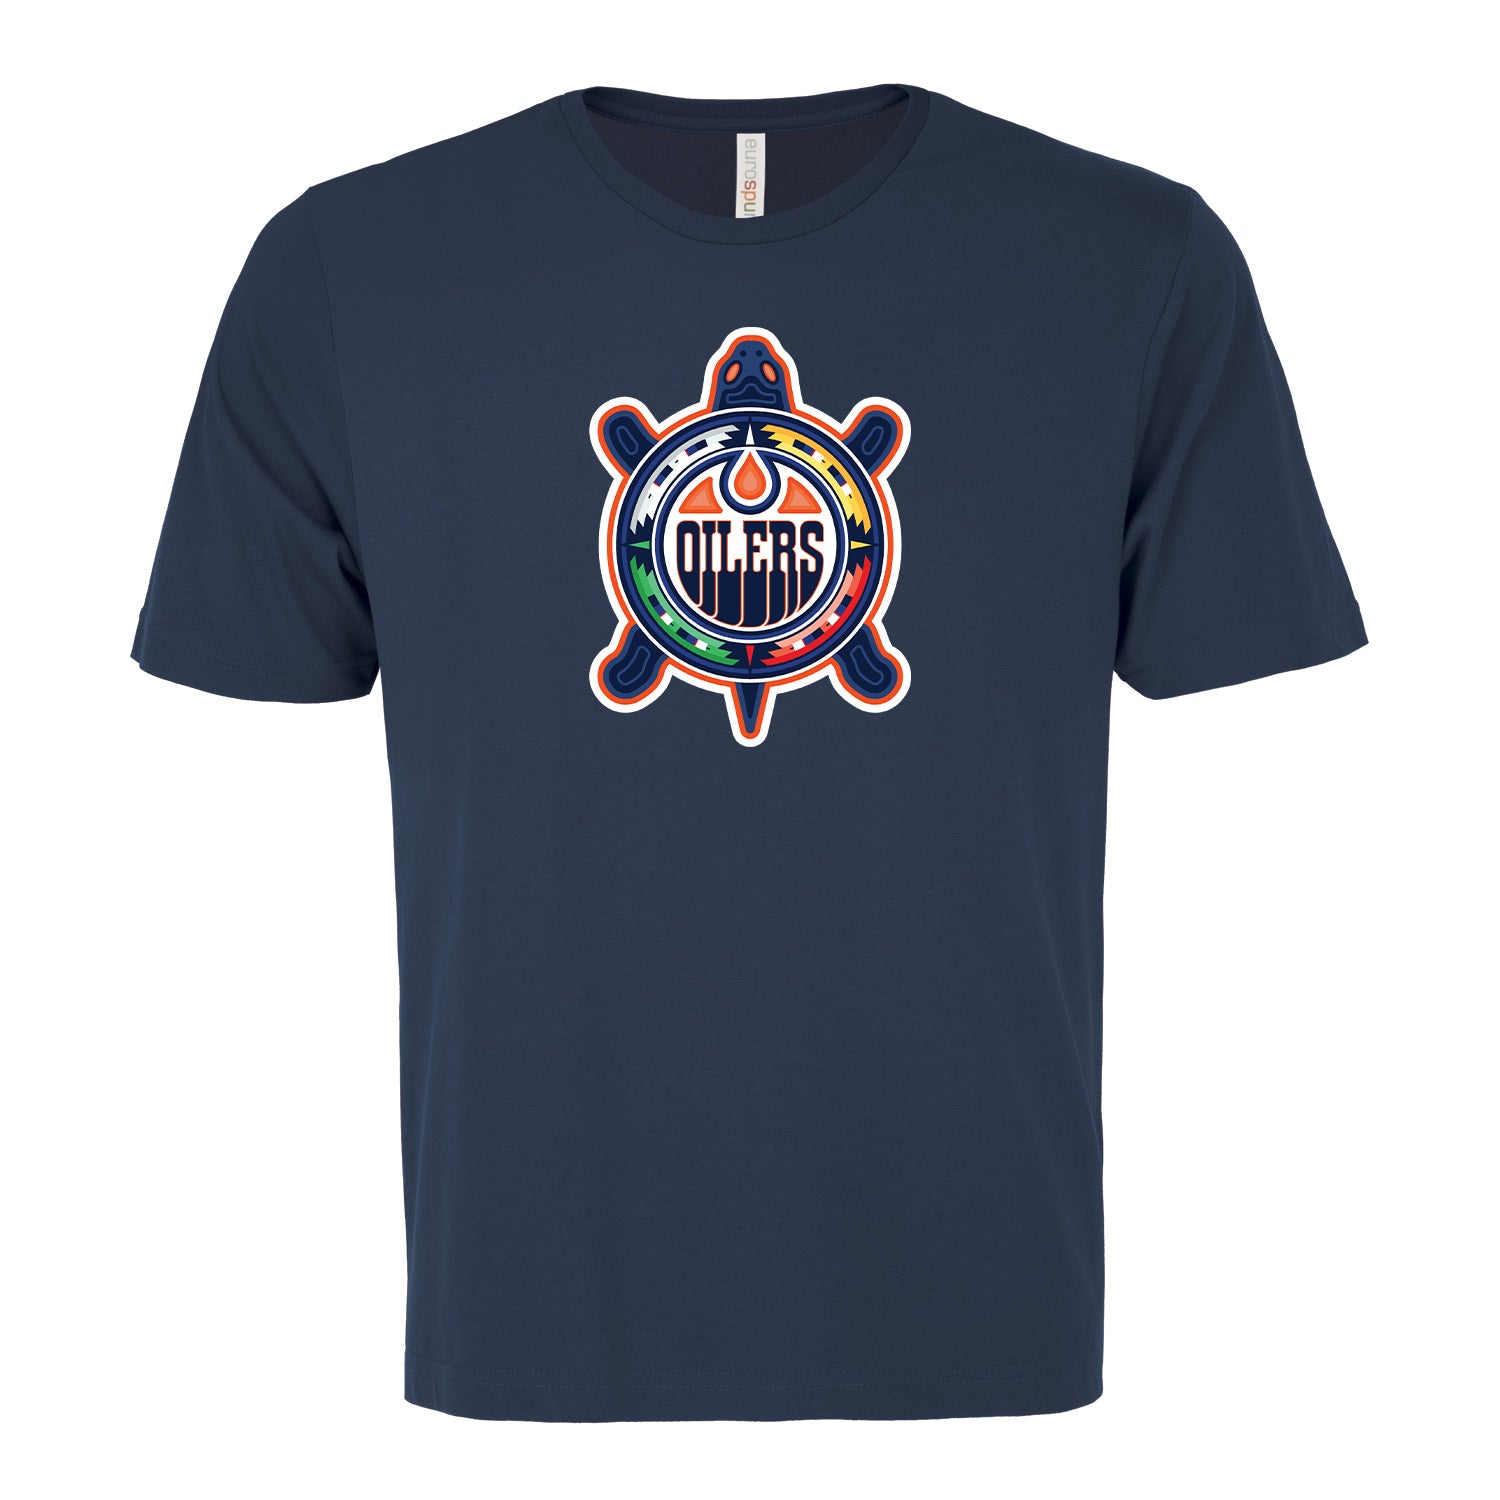 Are they selling oilers jerseys with Lance Cardinal's Turtle Island